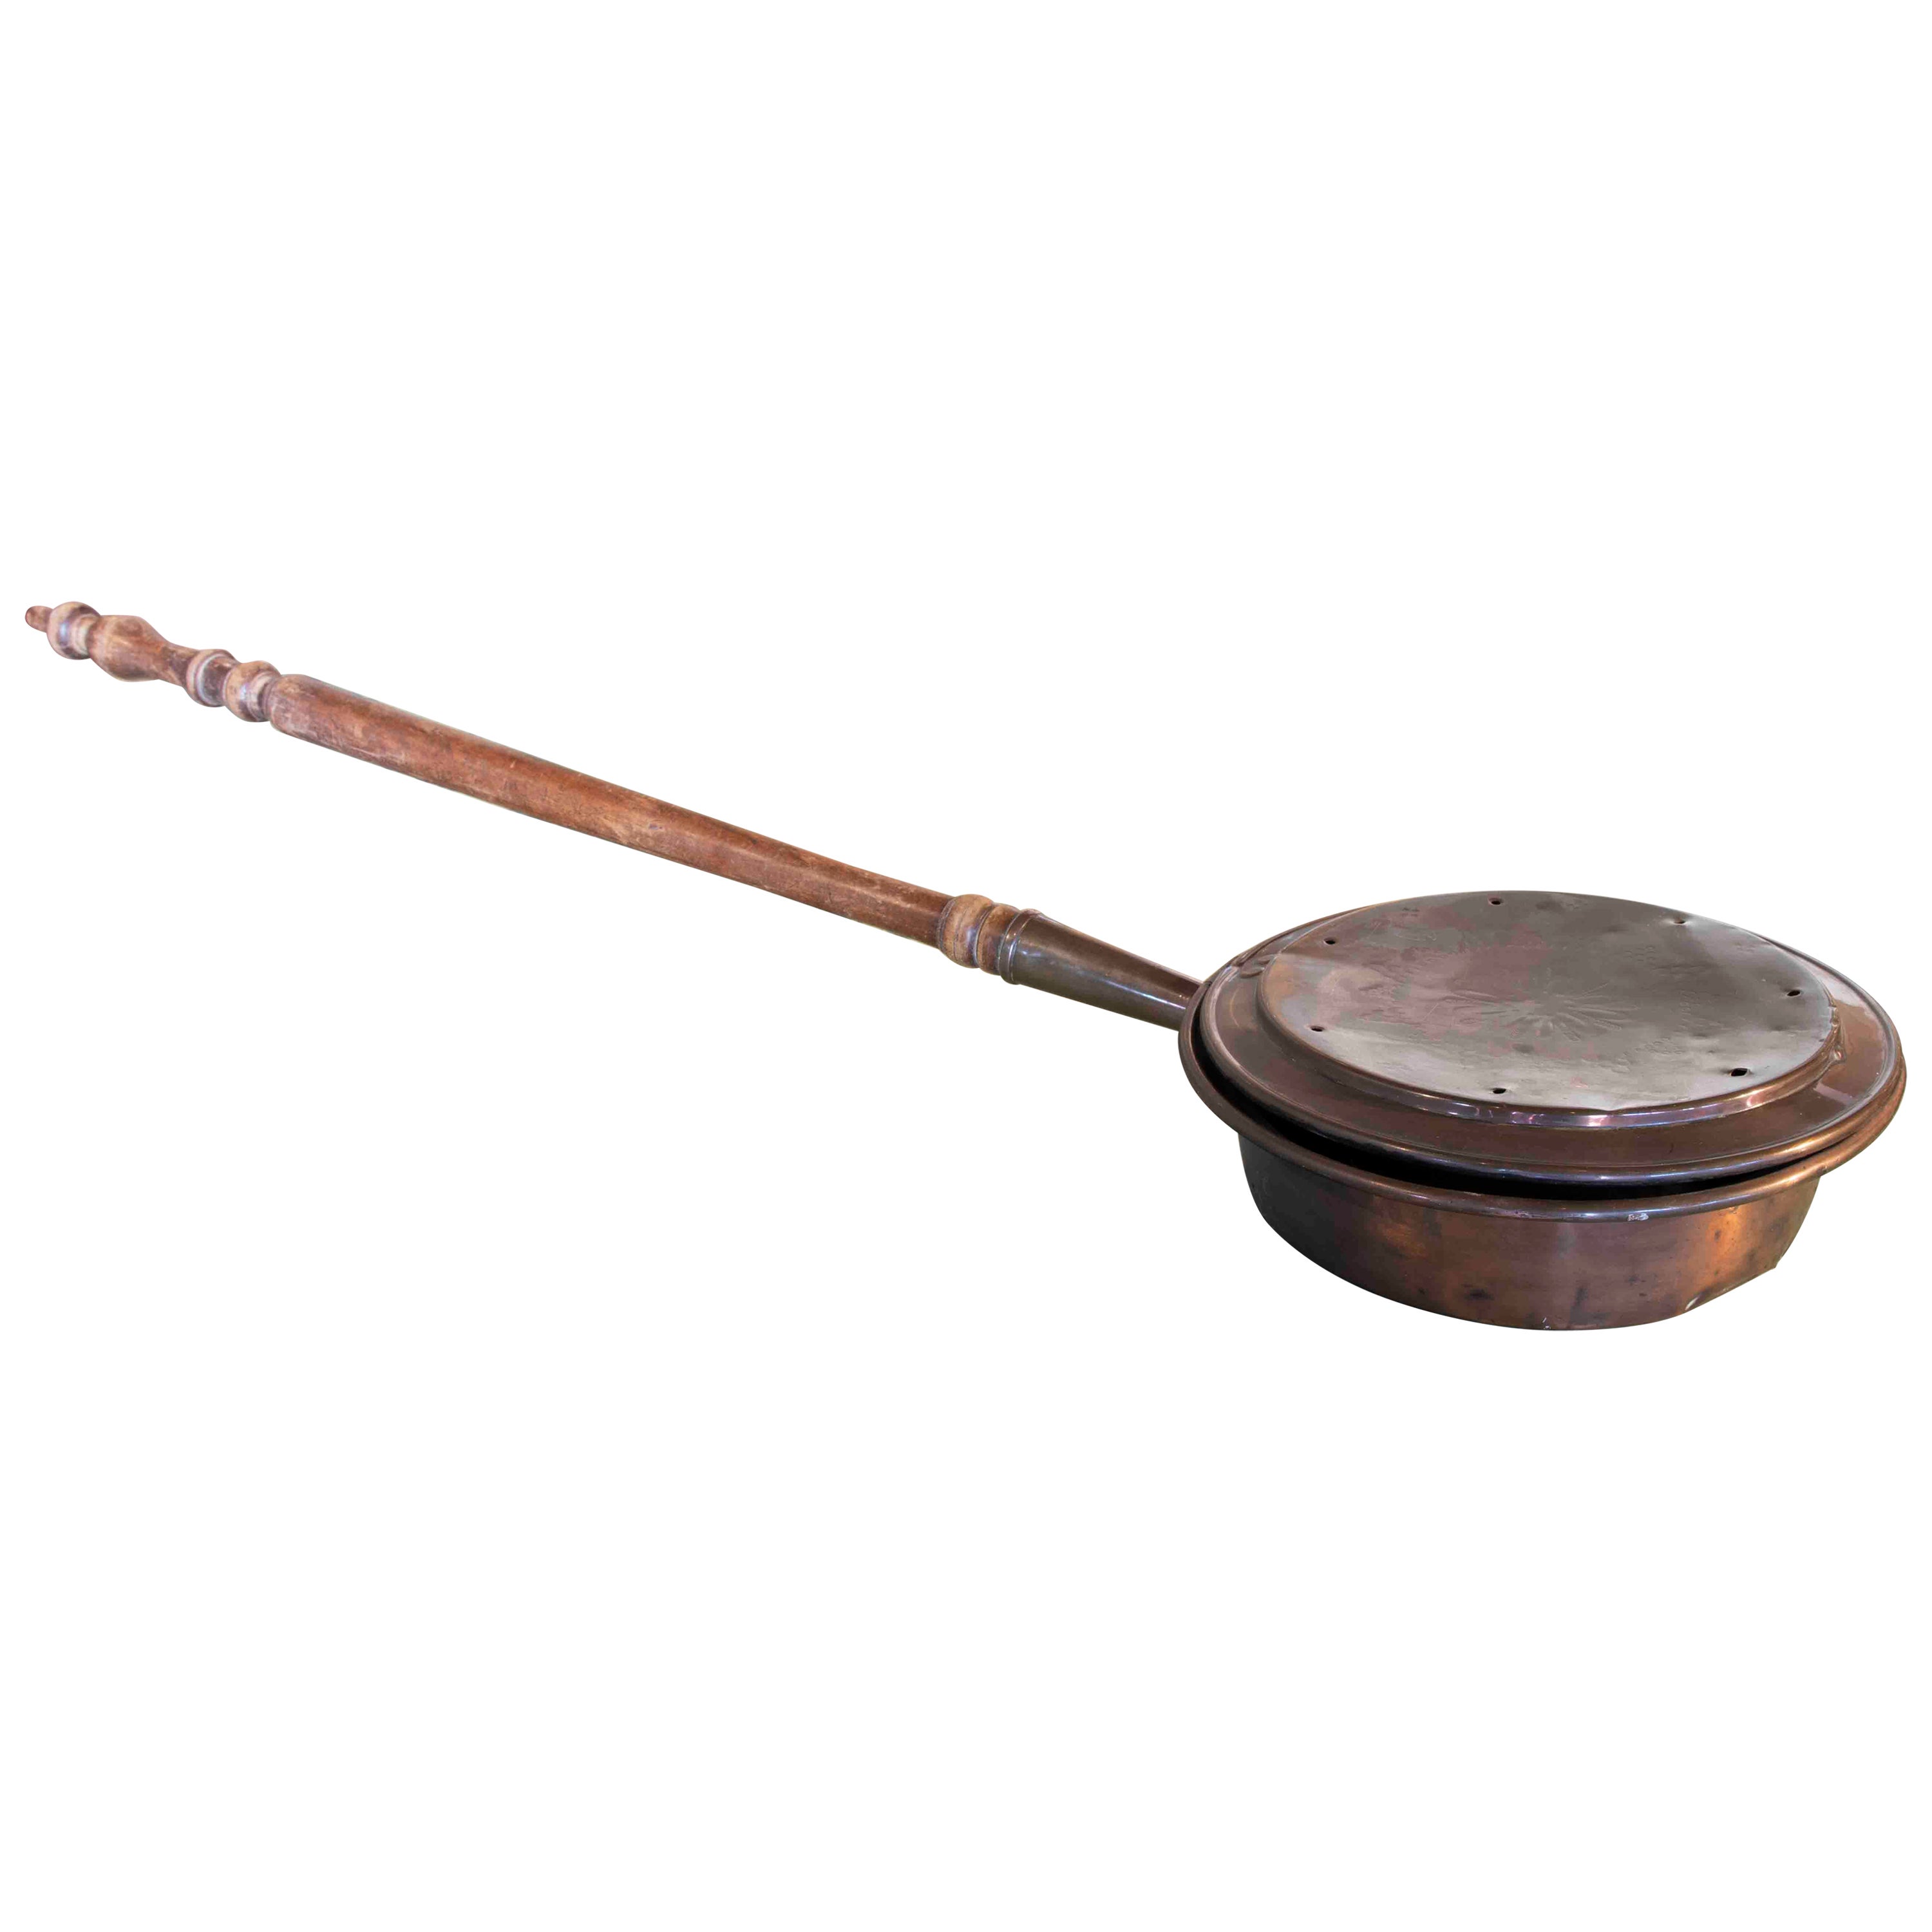 19th Century Spanish Copper Bedwarmer with Wooden Handle